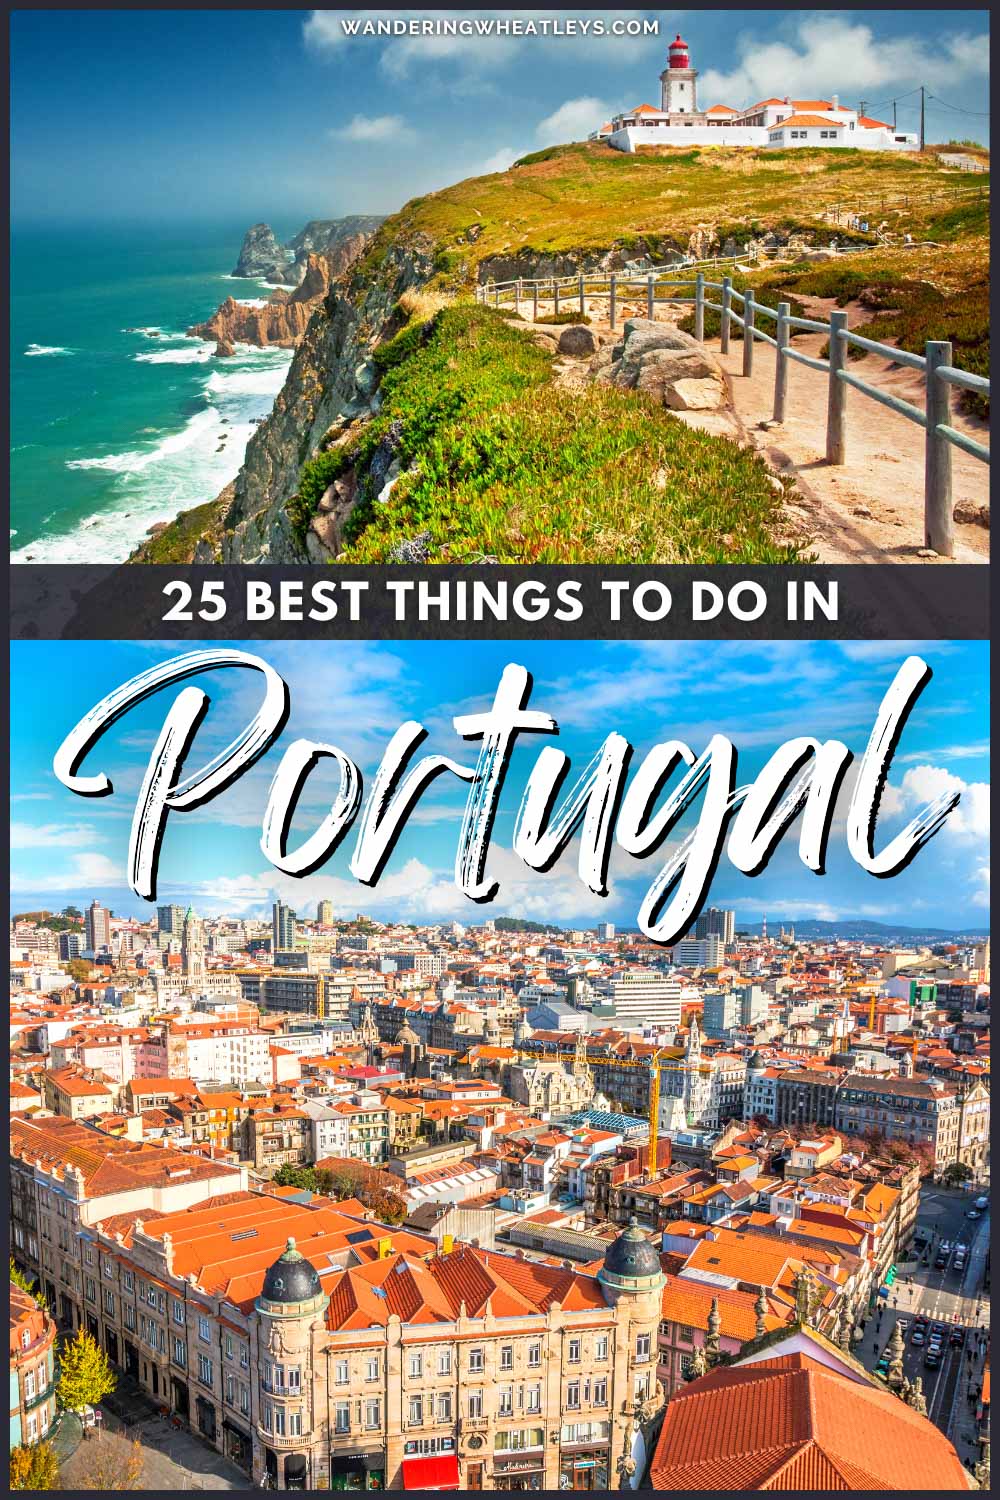 The Best Things to do in Portugal